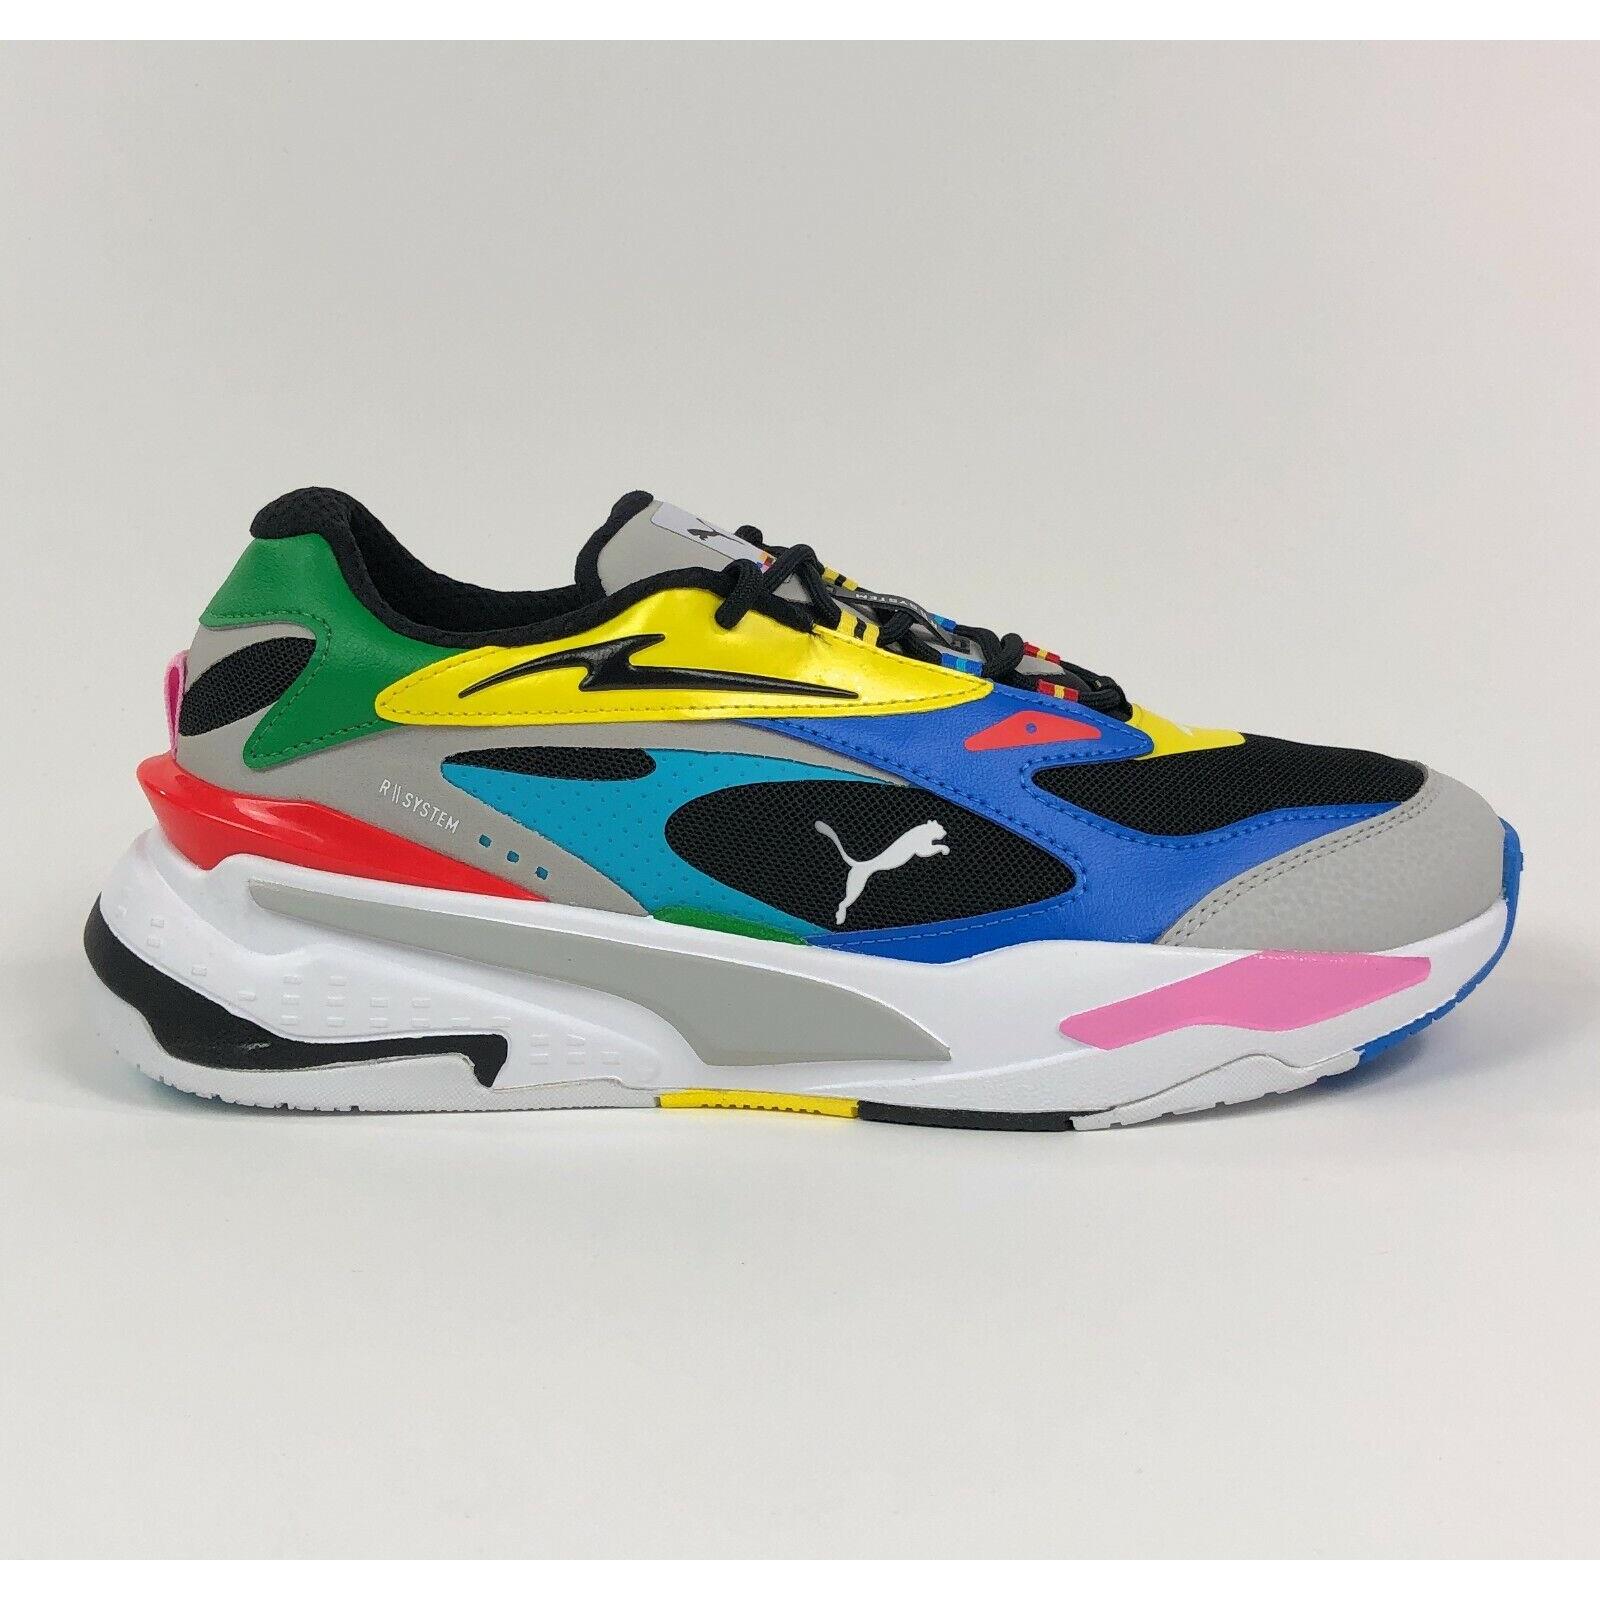 Puma Rs-fast Intl Shoes Sneakers Mens 10 Multi Color Low Top Athletic 381456-01